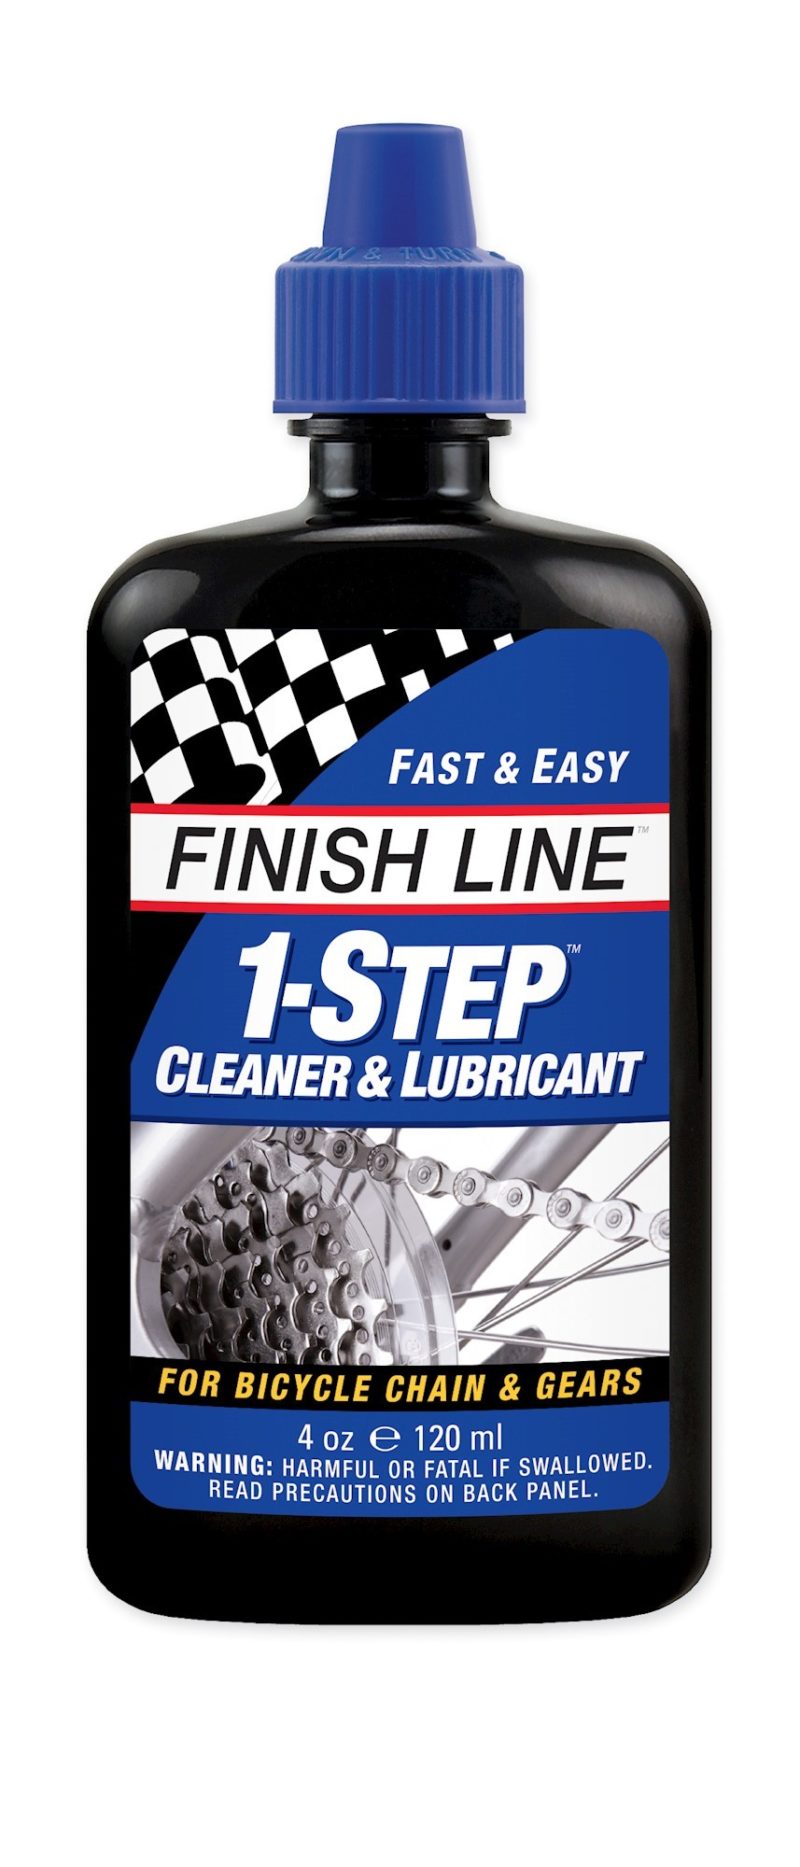 Finish Line 1-Step Cleaner & Lubricant multiolie